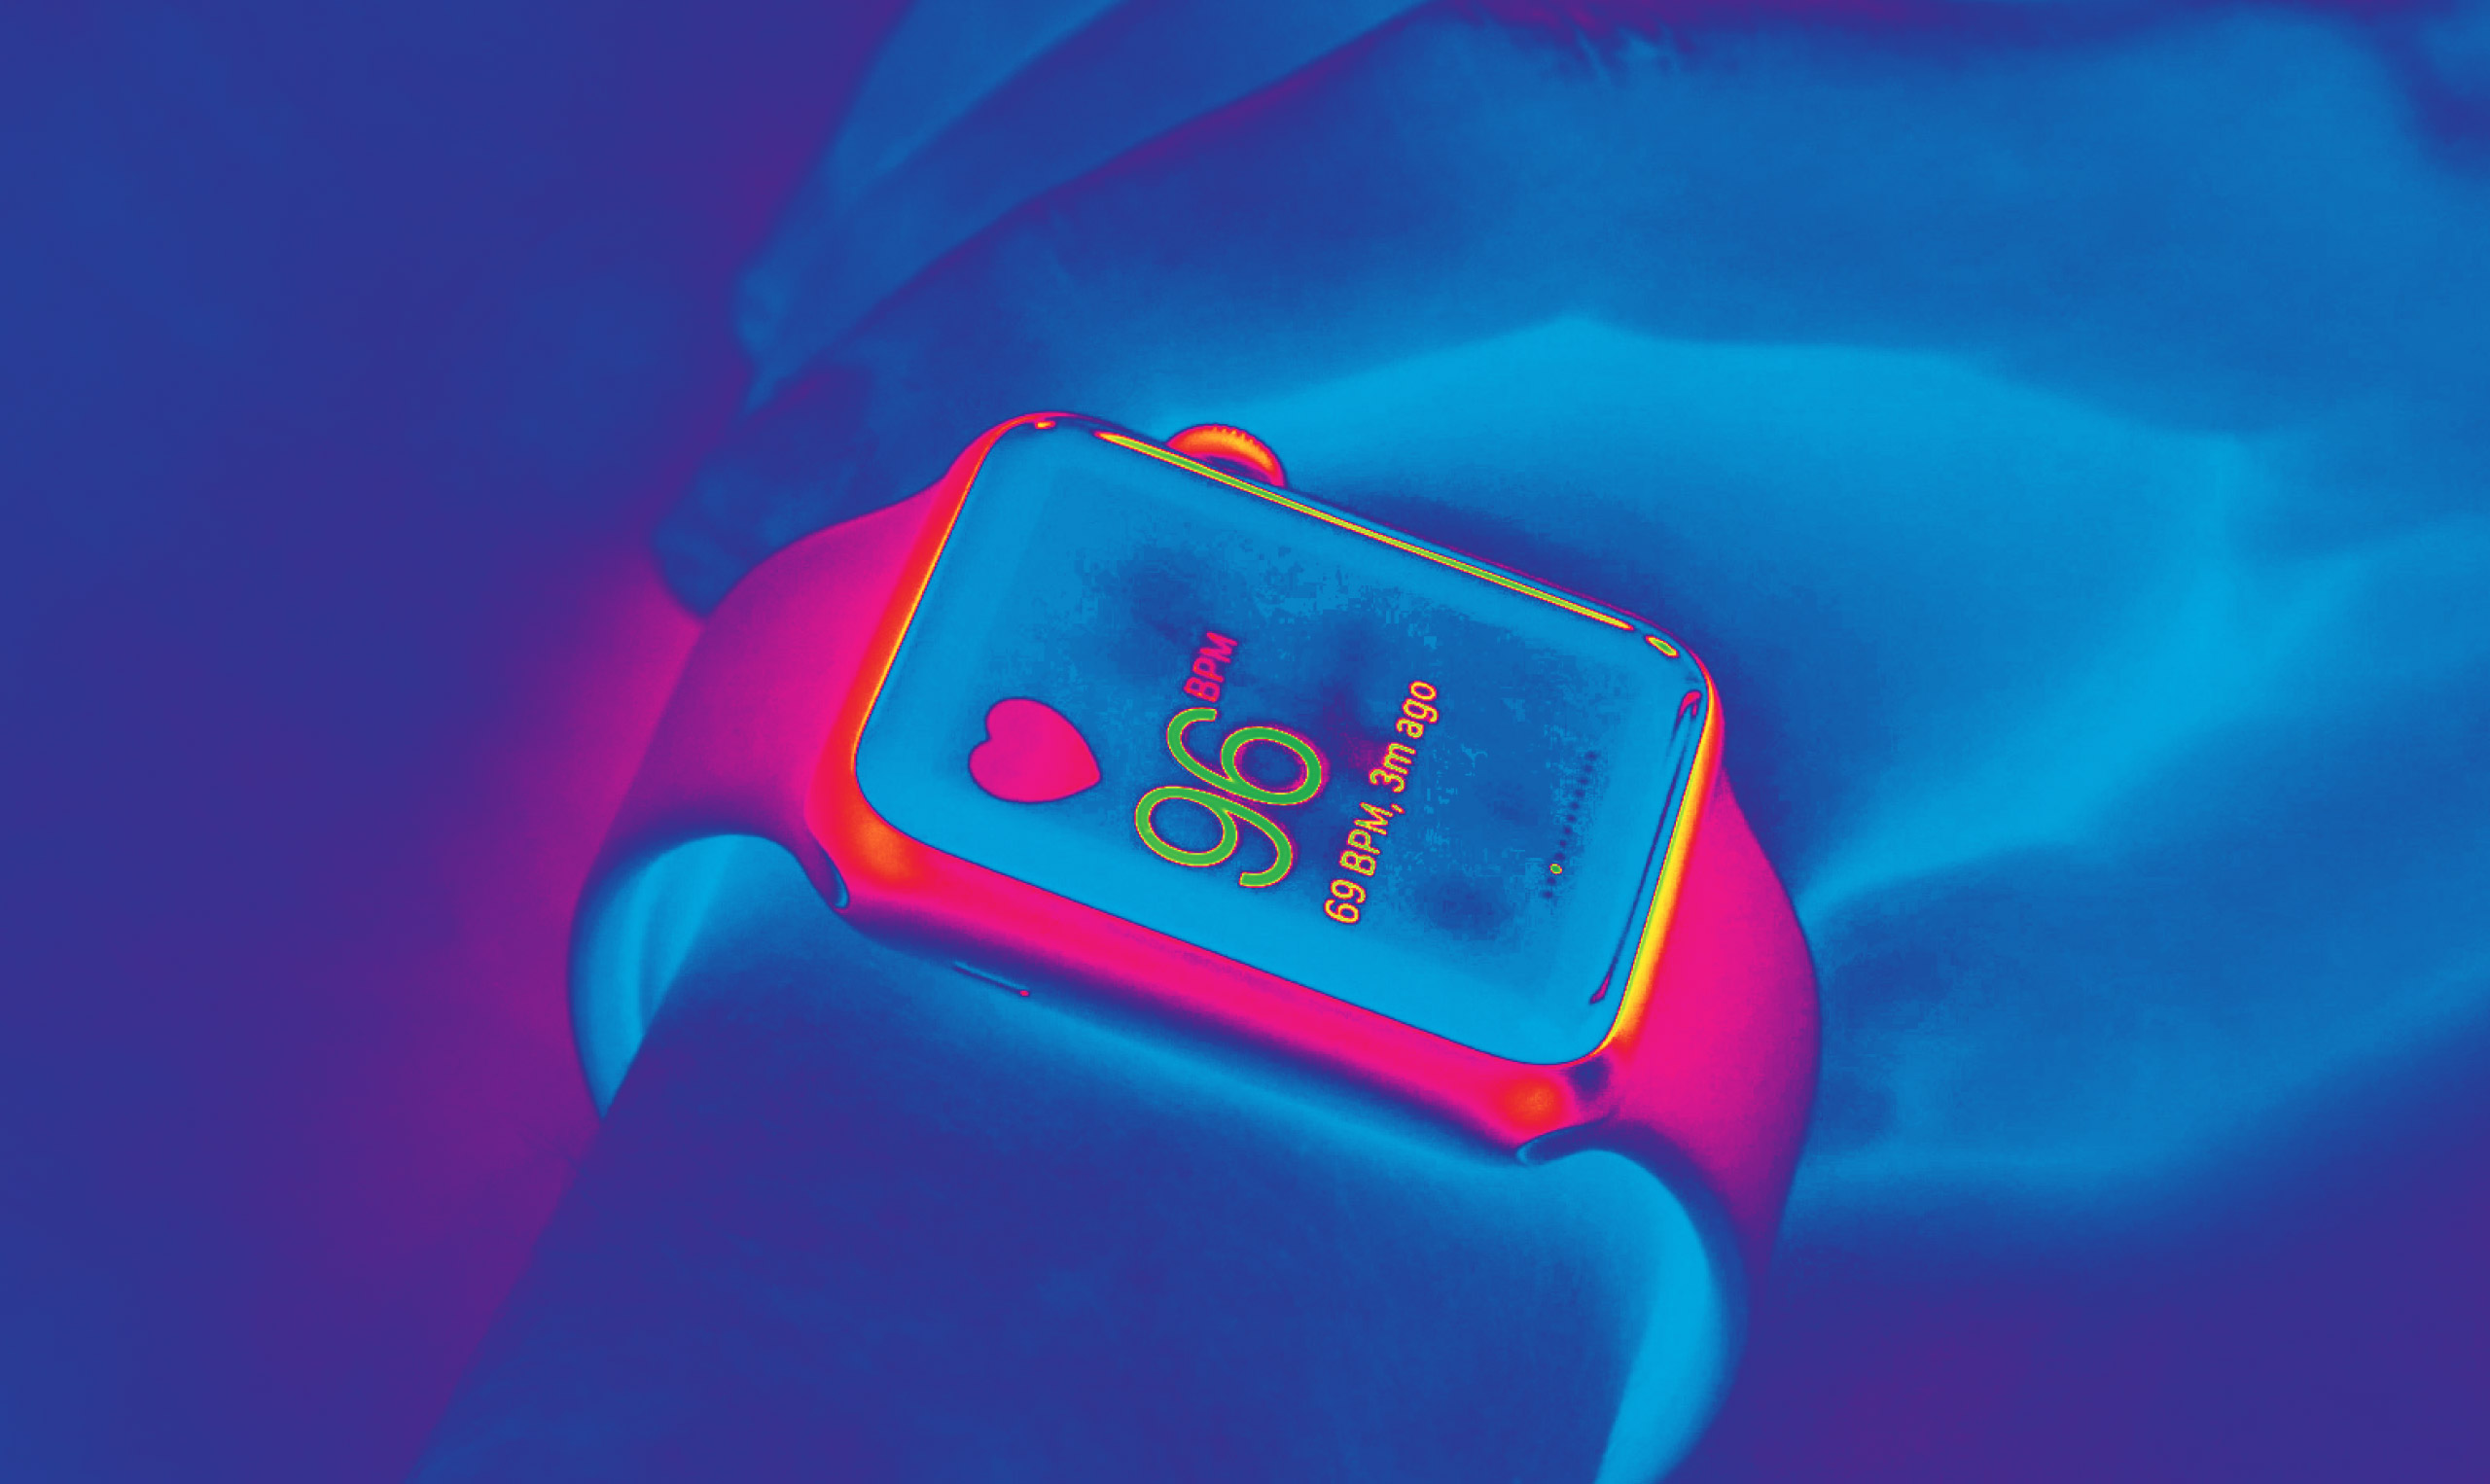 A person is holding an apple watch in front of a blue light.